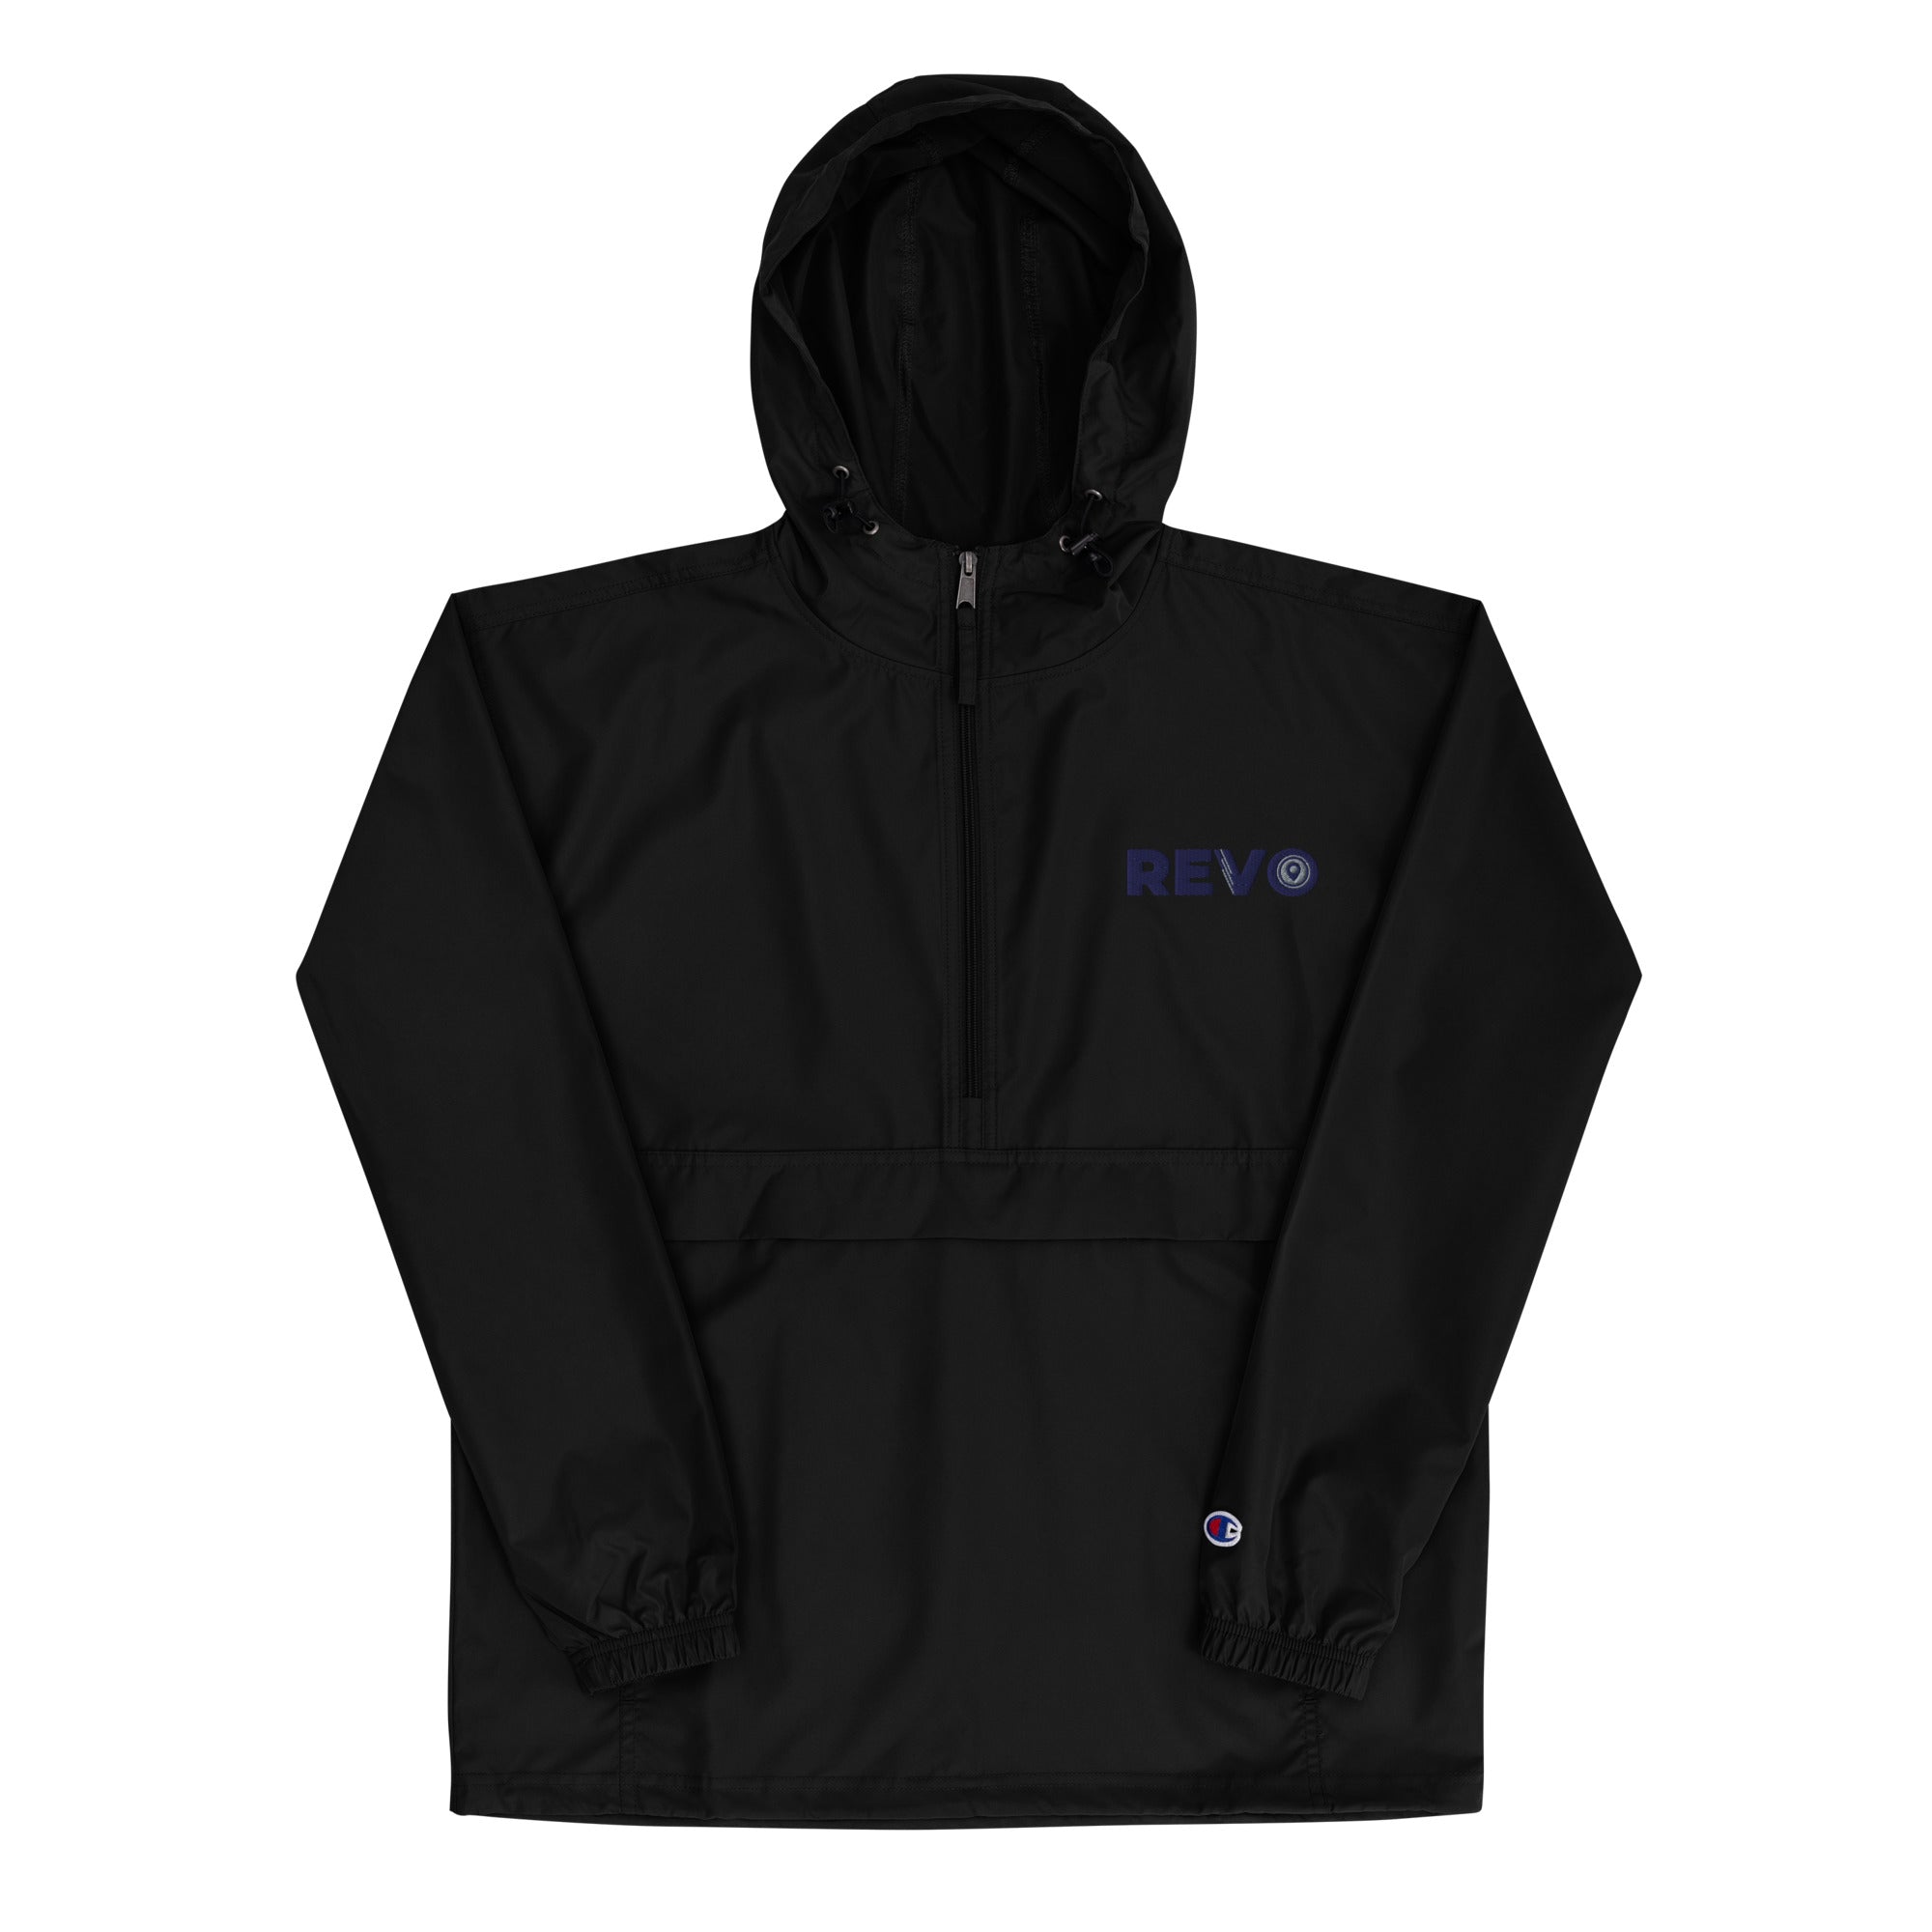 REVO Rideshare Embroidered Champion Packable Jacket v2